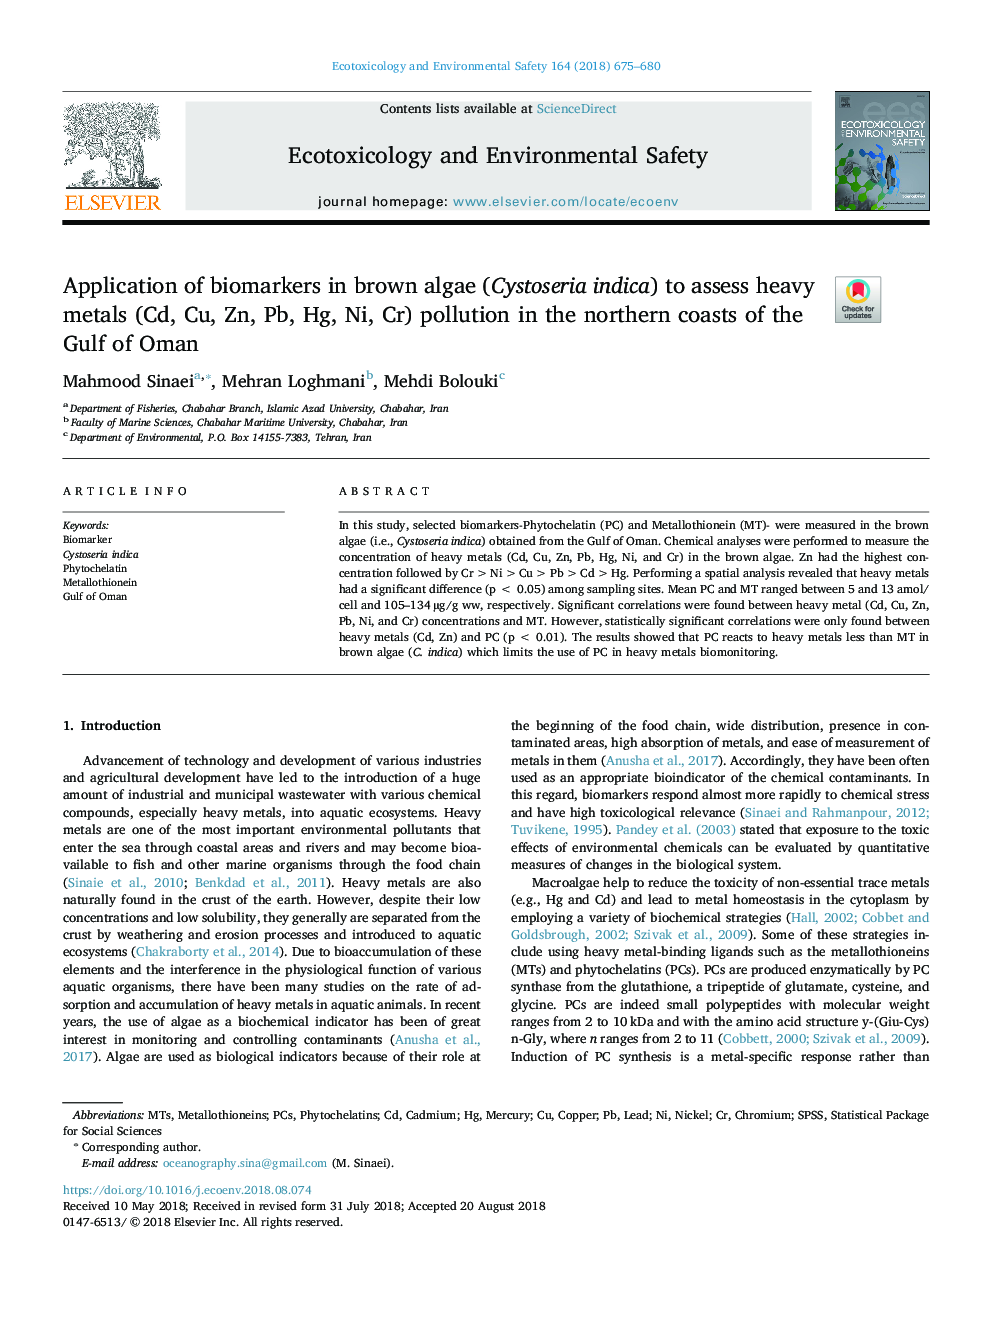 Application of biomarkers in brown algae (Cystoseria indica) to assess heavy metals (Cd, Cu, Zn, Pb, Hg, Ni, Cr) pollution in the northern coasts of the Gulf of Oman